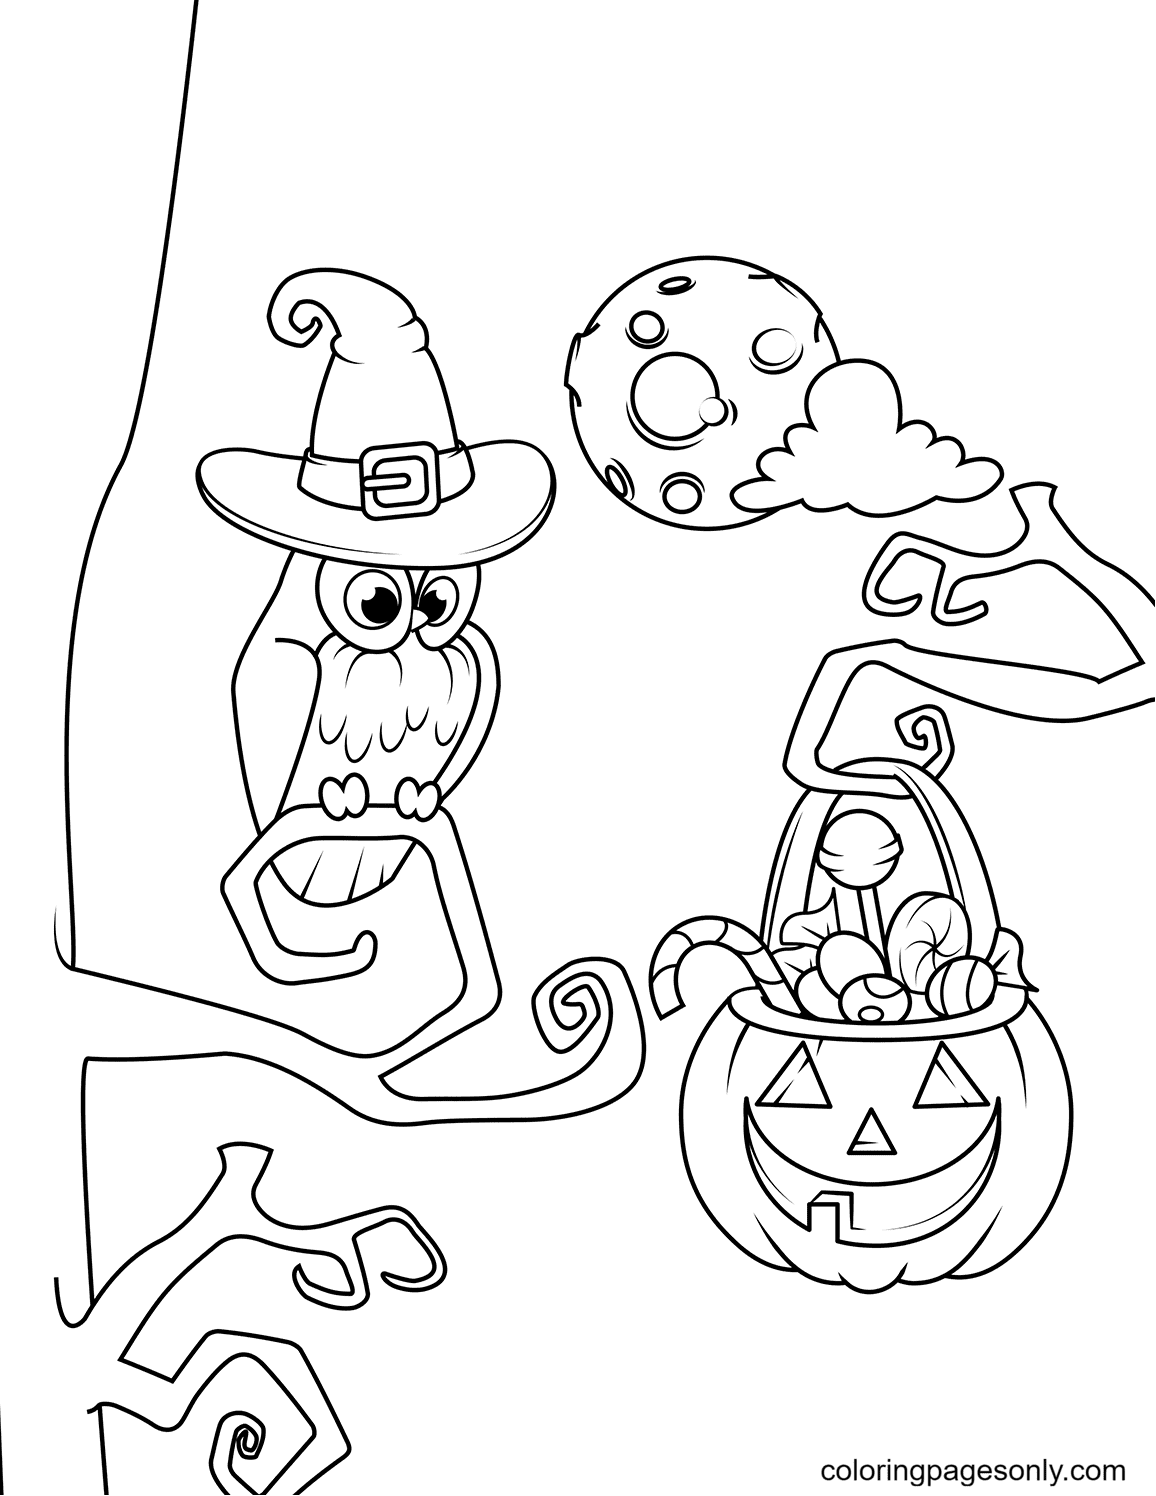 Owl and Jack O Lantern with Candies Halloween Coloring Pages